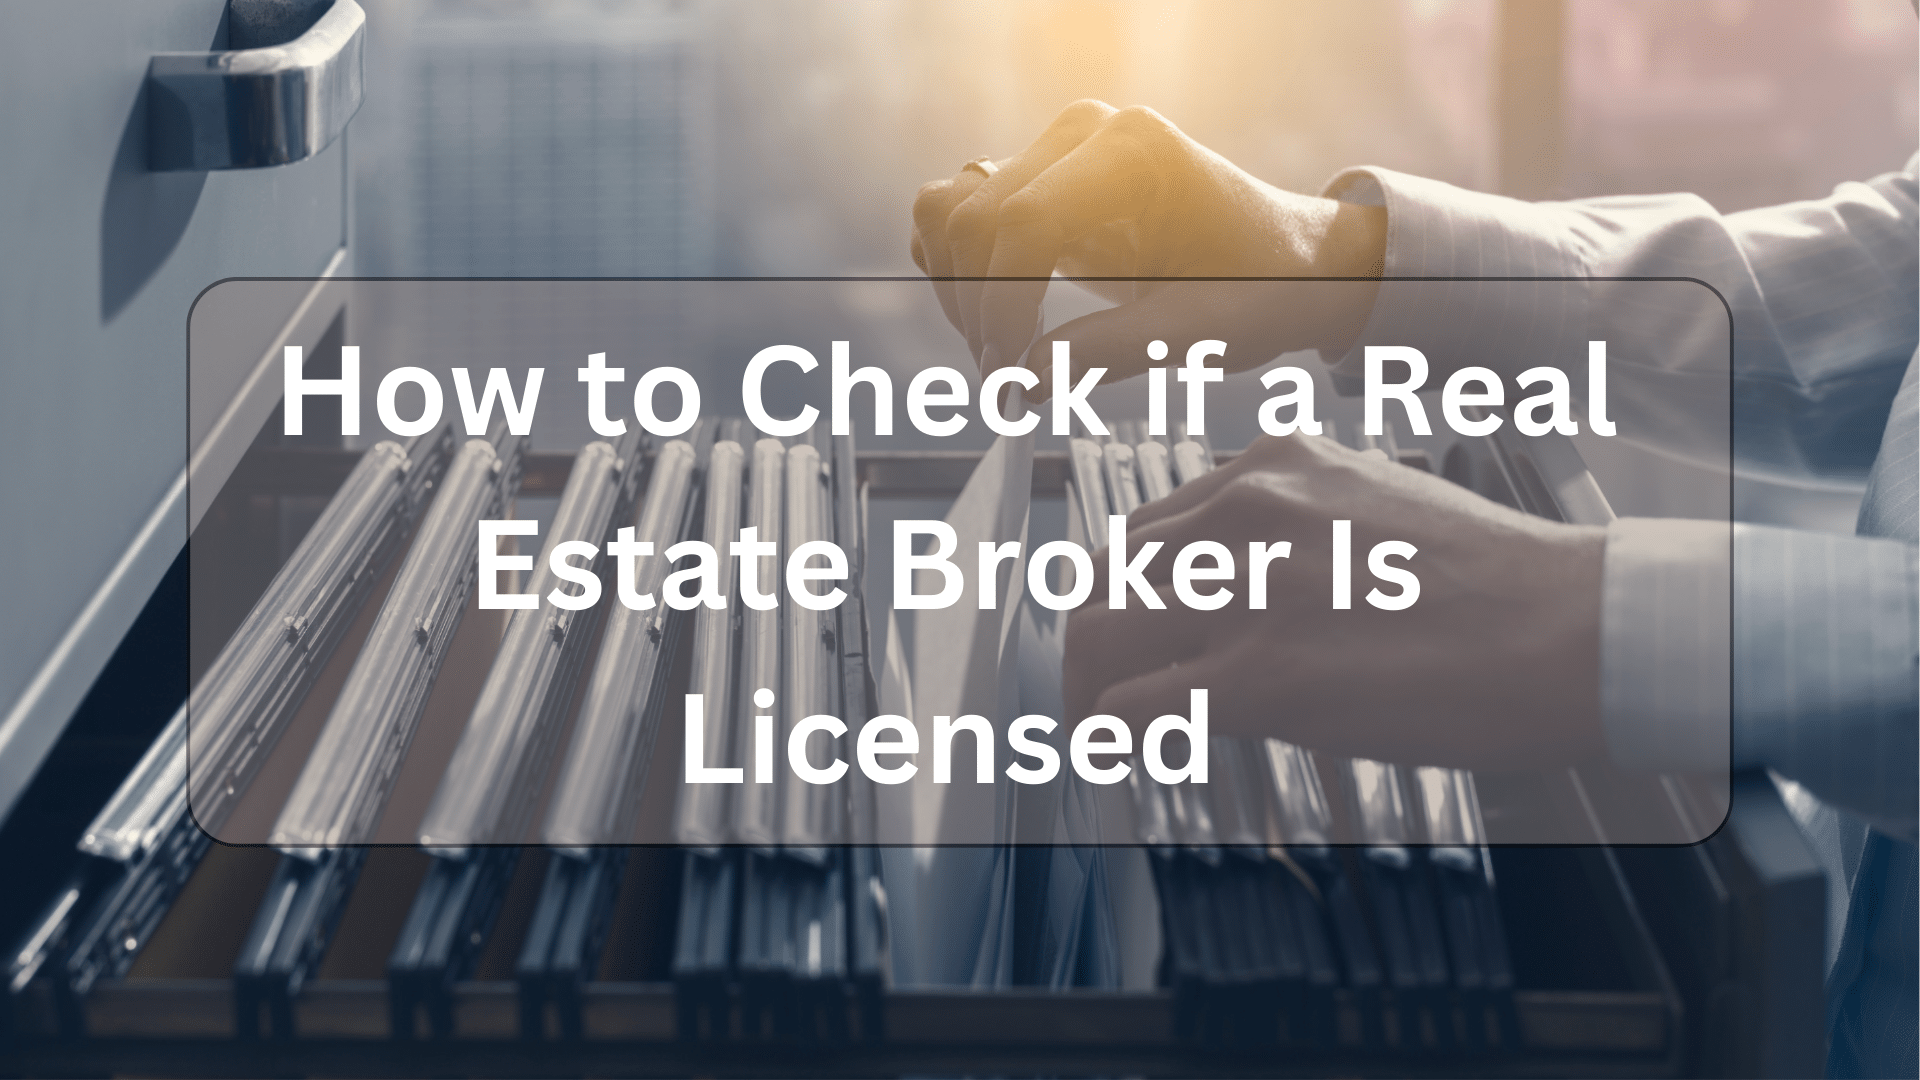 How to Check if a Real Estate Broker Is Licensed